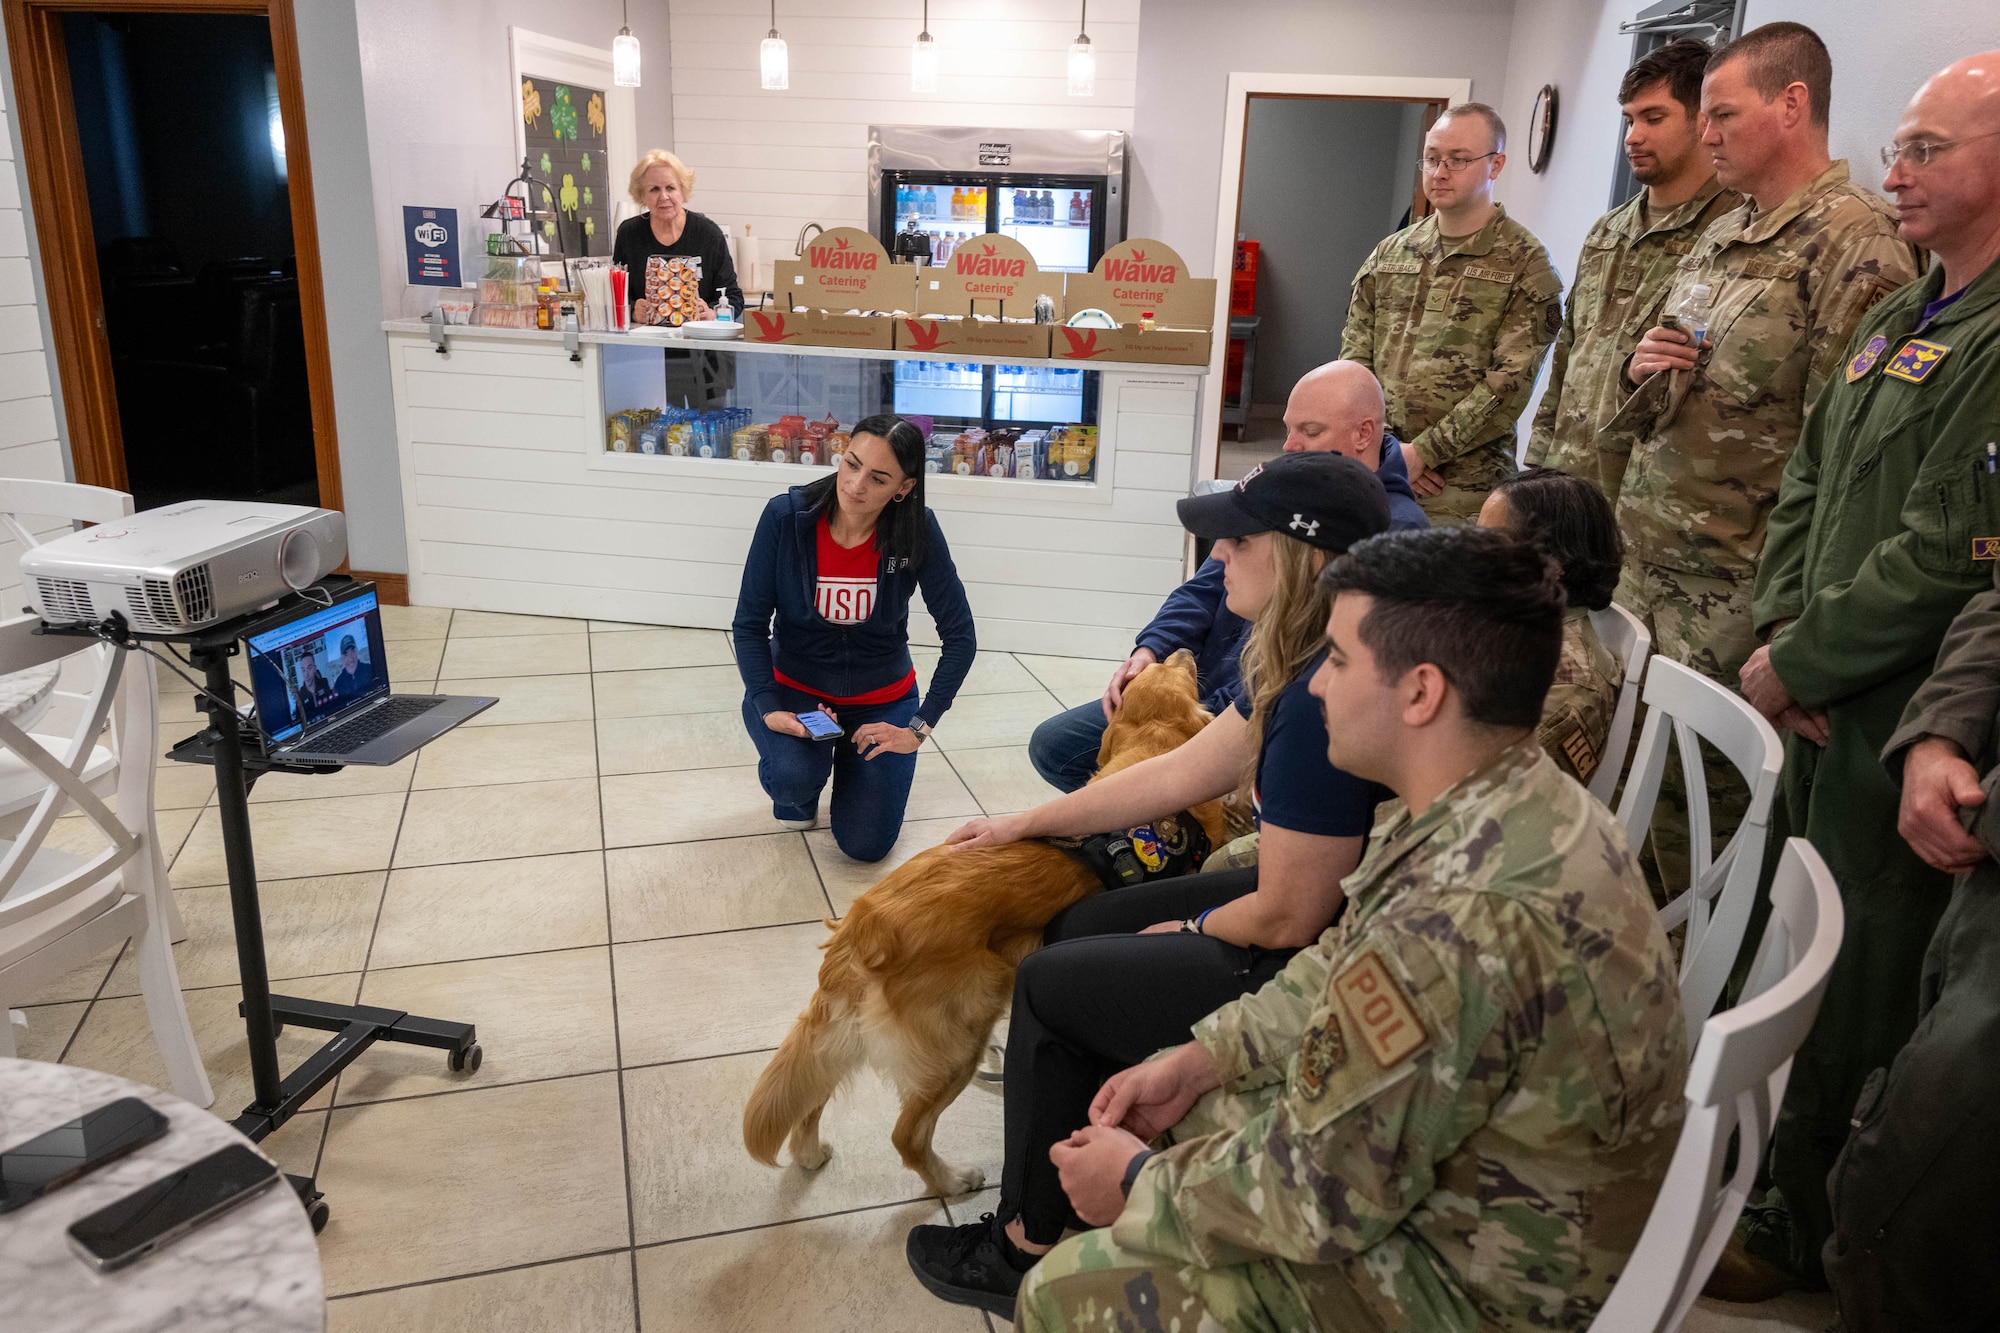 Ranger, Delaware USO therapy dog, along with USO staff and members of Team Dover, speak with Cesar Millan, dog trainer and star of the Emmy-nominated television series The Dog Whisperer, via webcam at Dover Air Force Base, Delaware, March 15, 2024. Milan spoke with staff and service members from the USO centers of the four finalists of the 2023 USO Canine Volunteer of the Year Award to congratulate them and answer questions. (U.S. Air Force photo by Mauricio Campino)